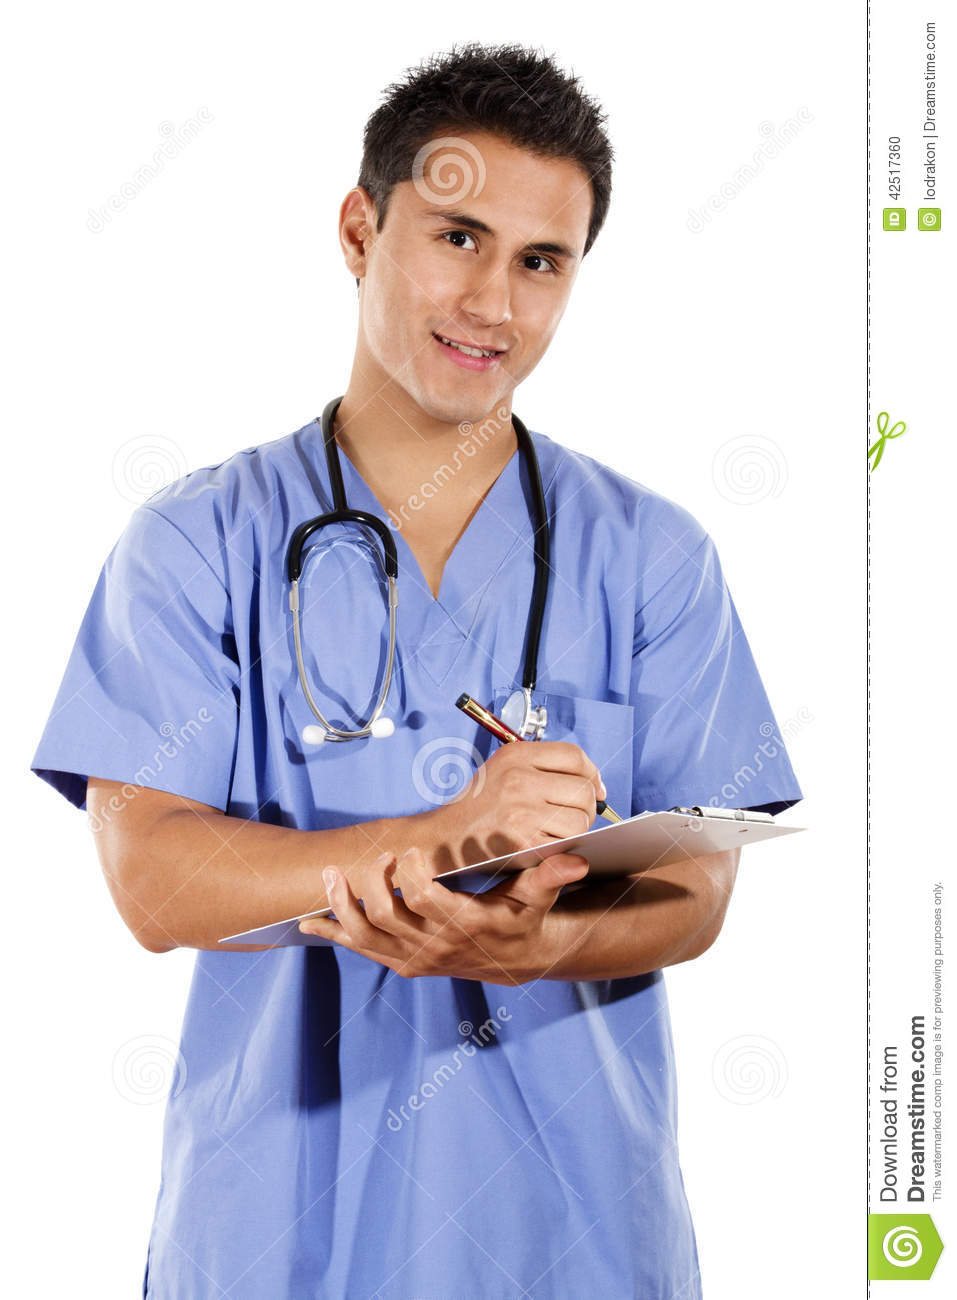 Stock Image Of Male Healthcare Worker Isolated On White Background 